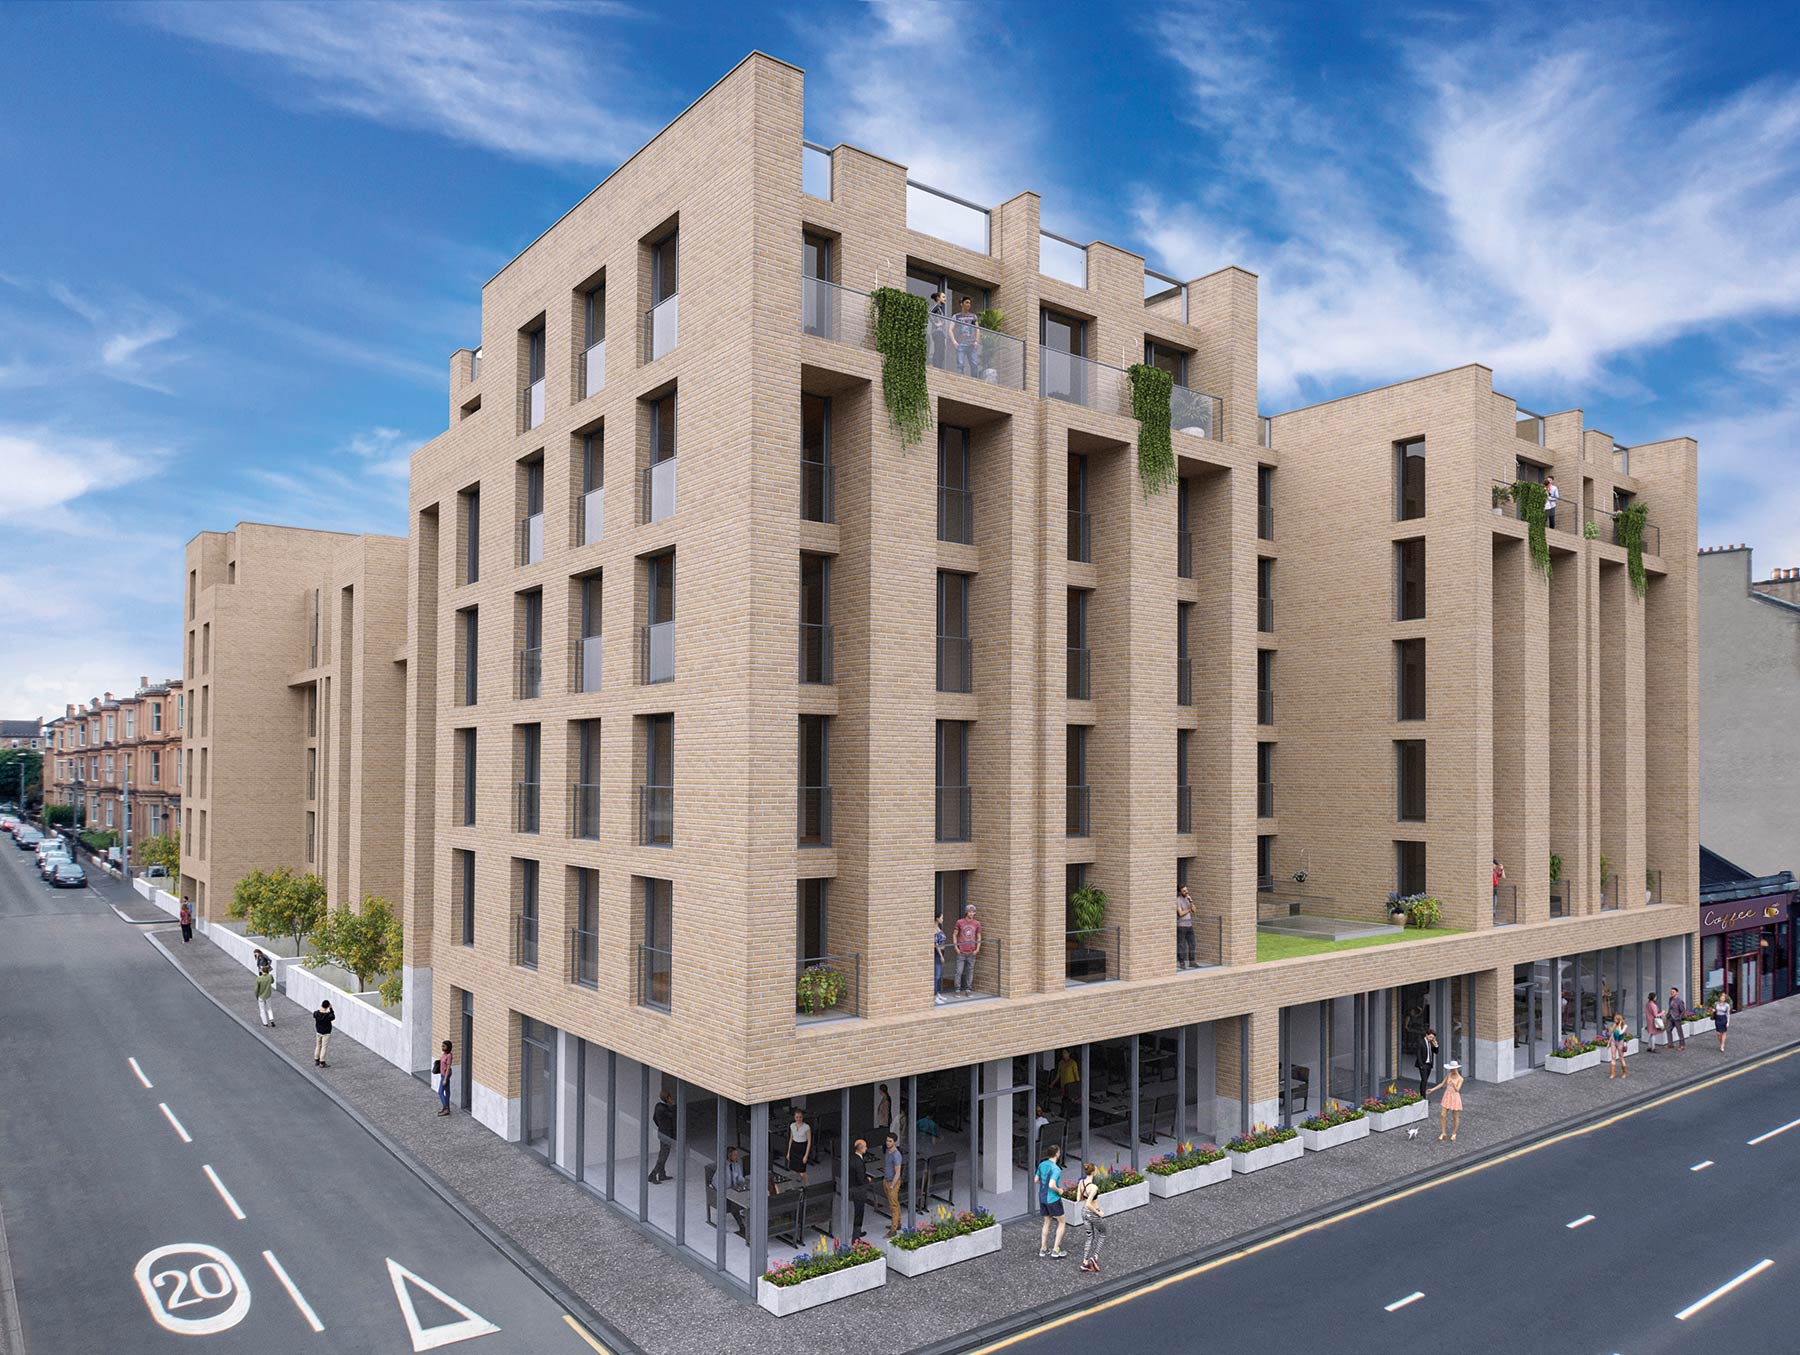 Demolition work begins on Glasgow city centre apartments project